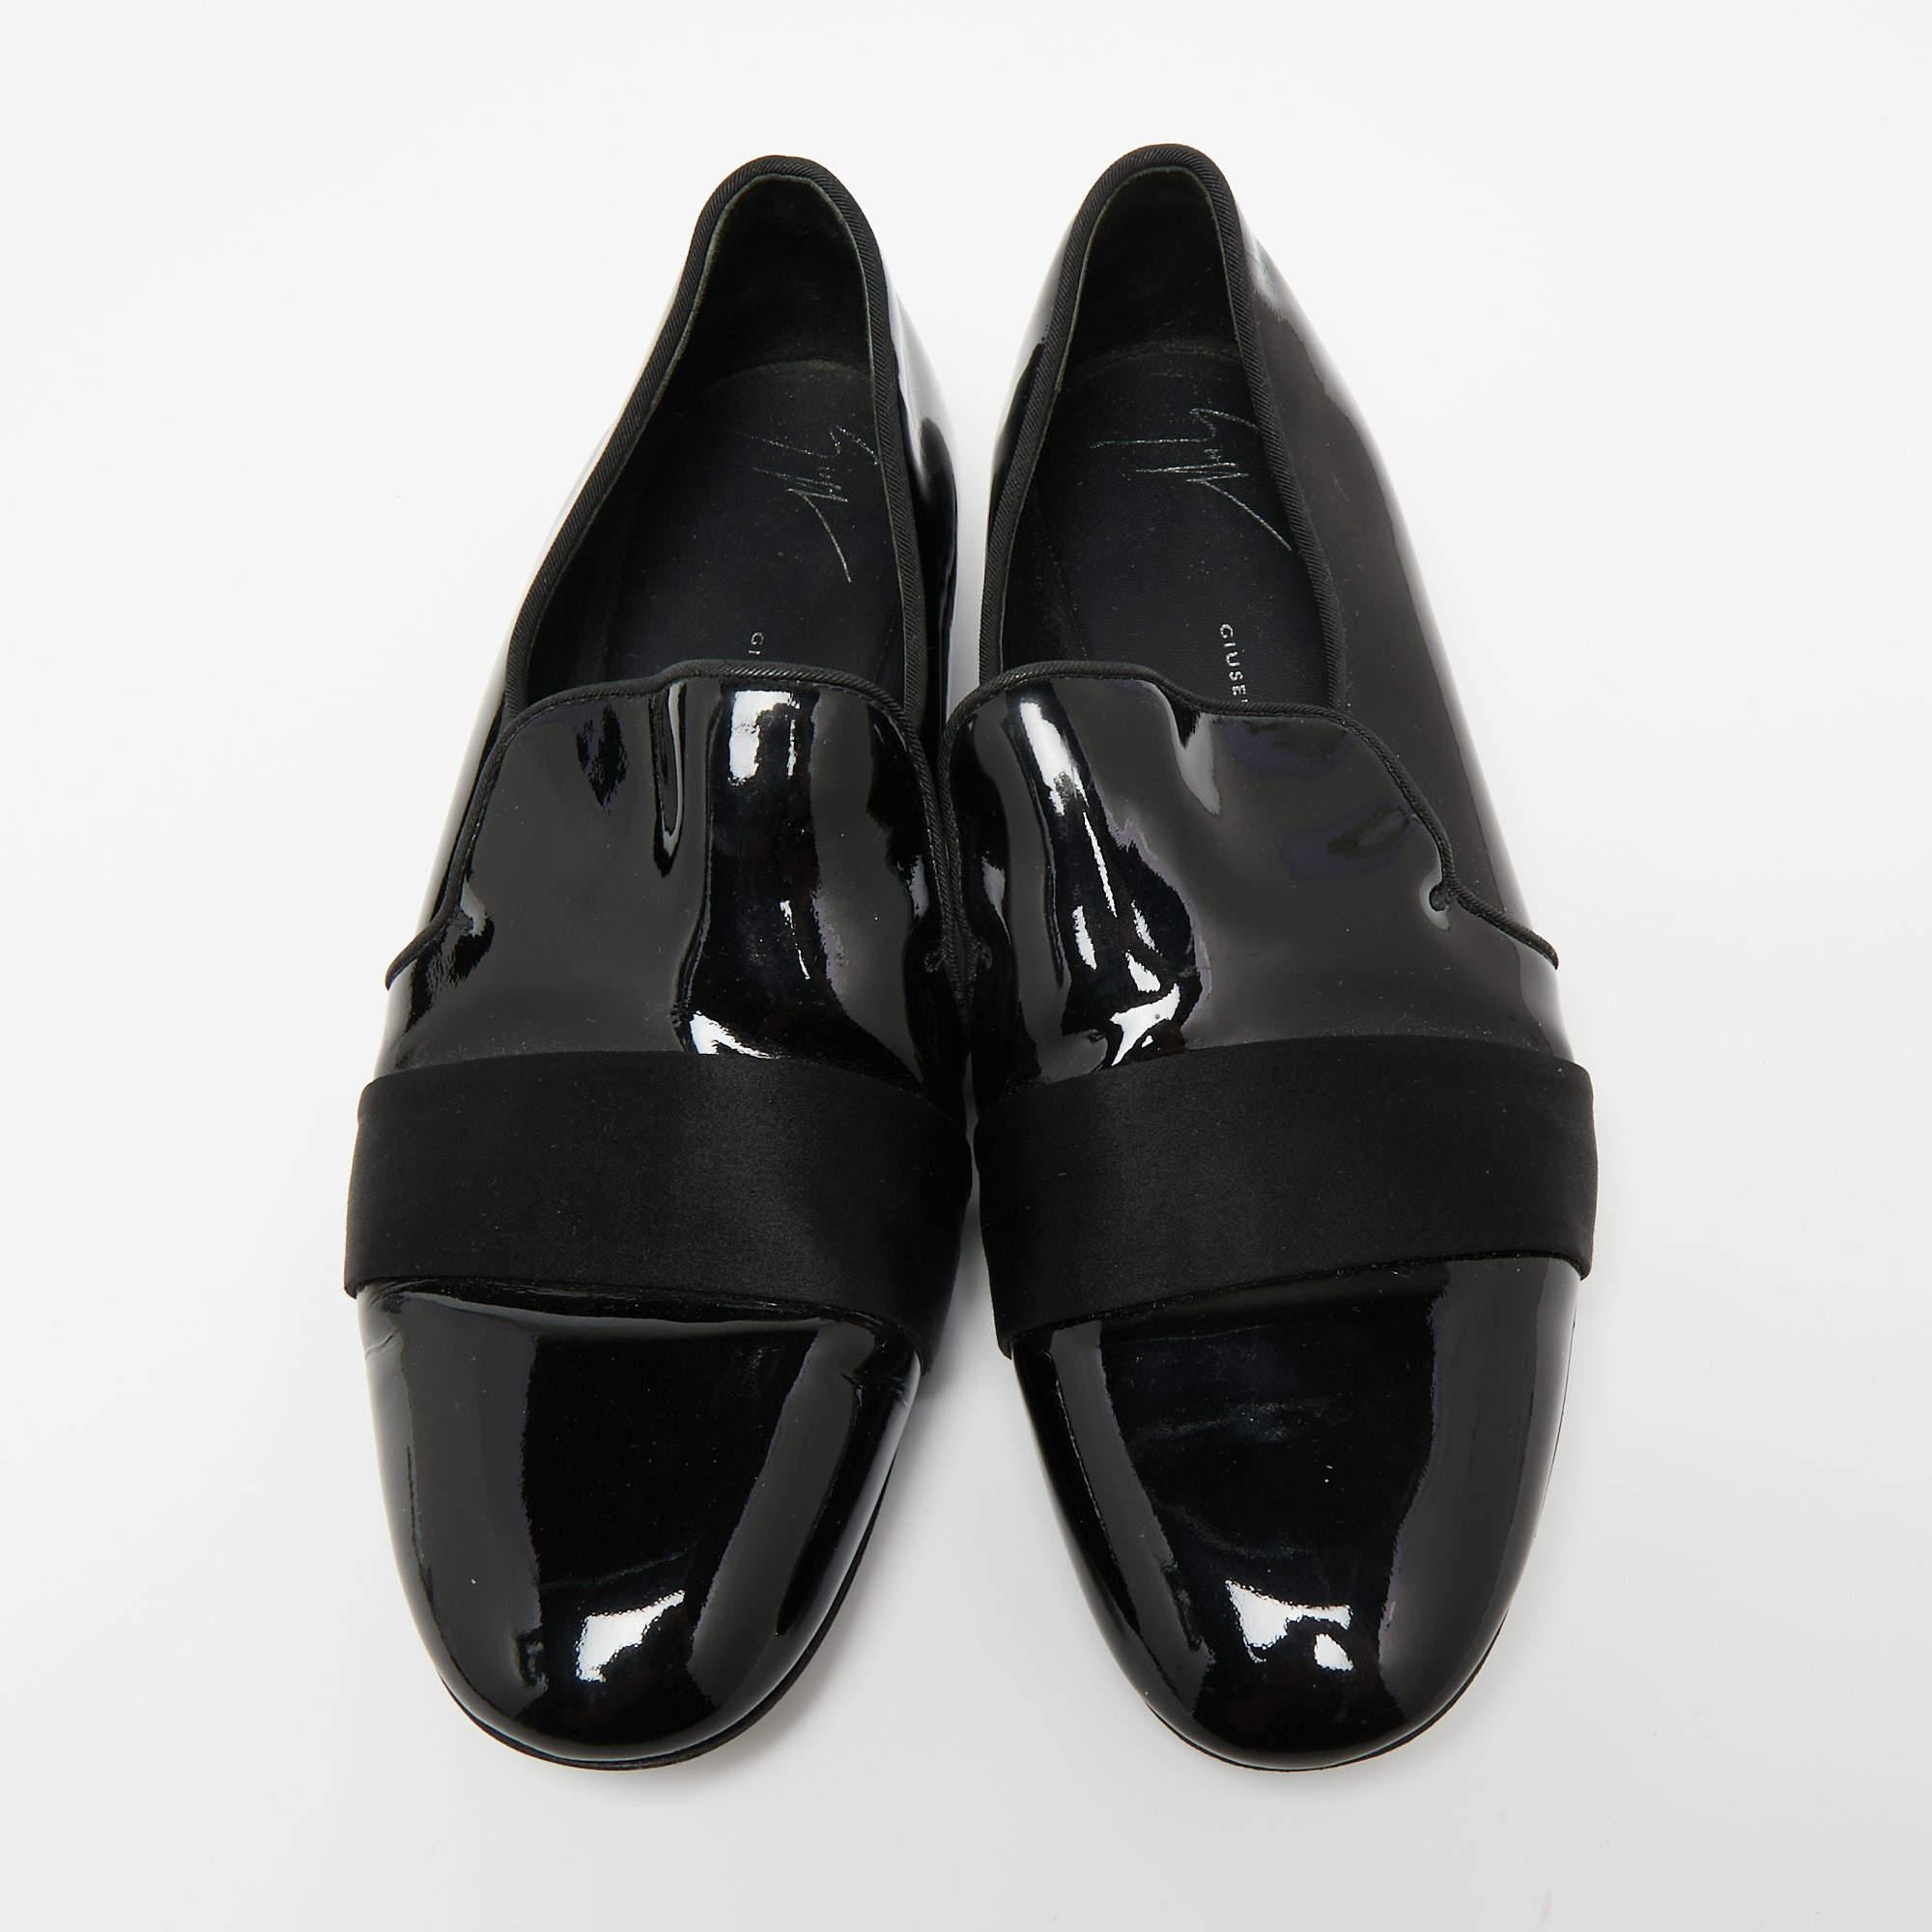 Polished and classy, these smoking slippers from Giuseppe Zanotti are all about flaunting panache! They are crafted using black patent leather and satin and showcase cap toes, a slip-on style, and 2.5 cm heels. Incorporate a luxe element into your